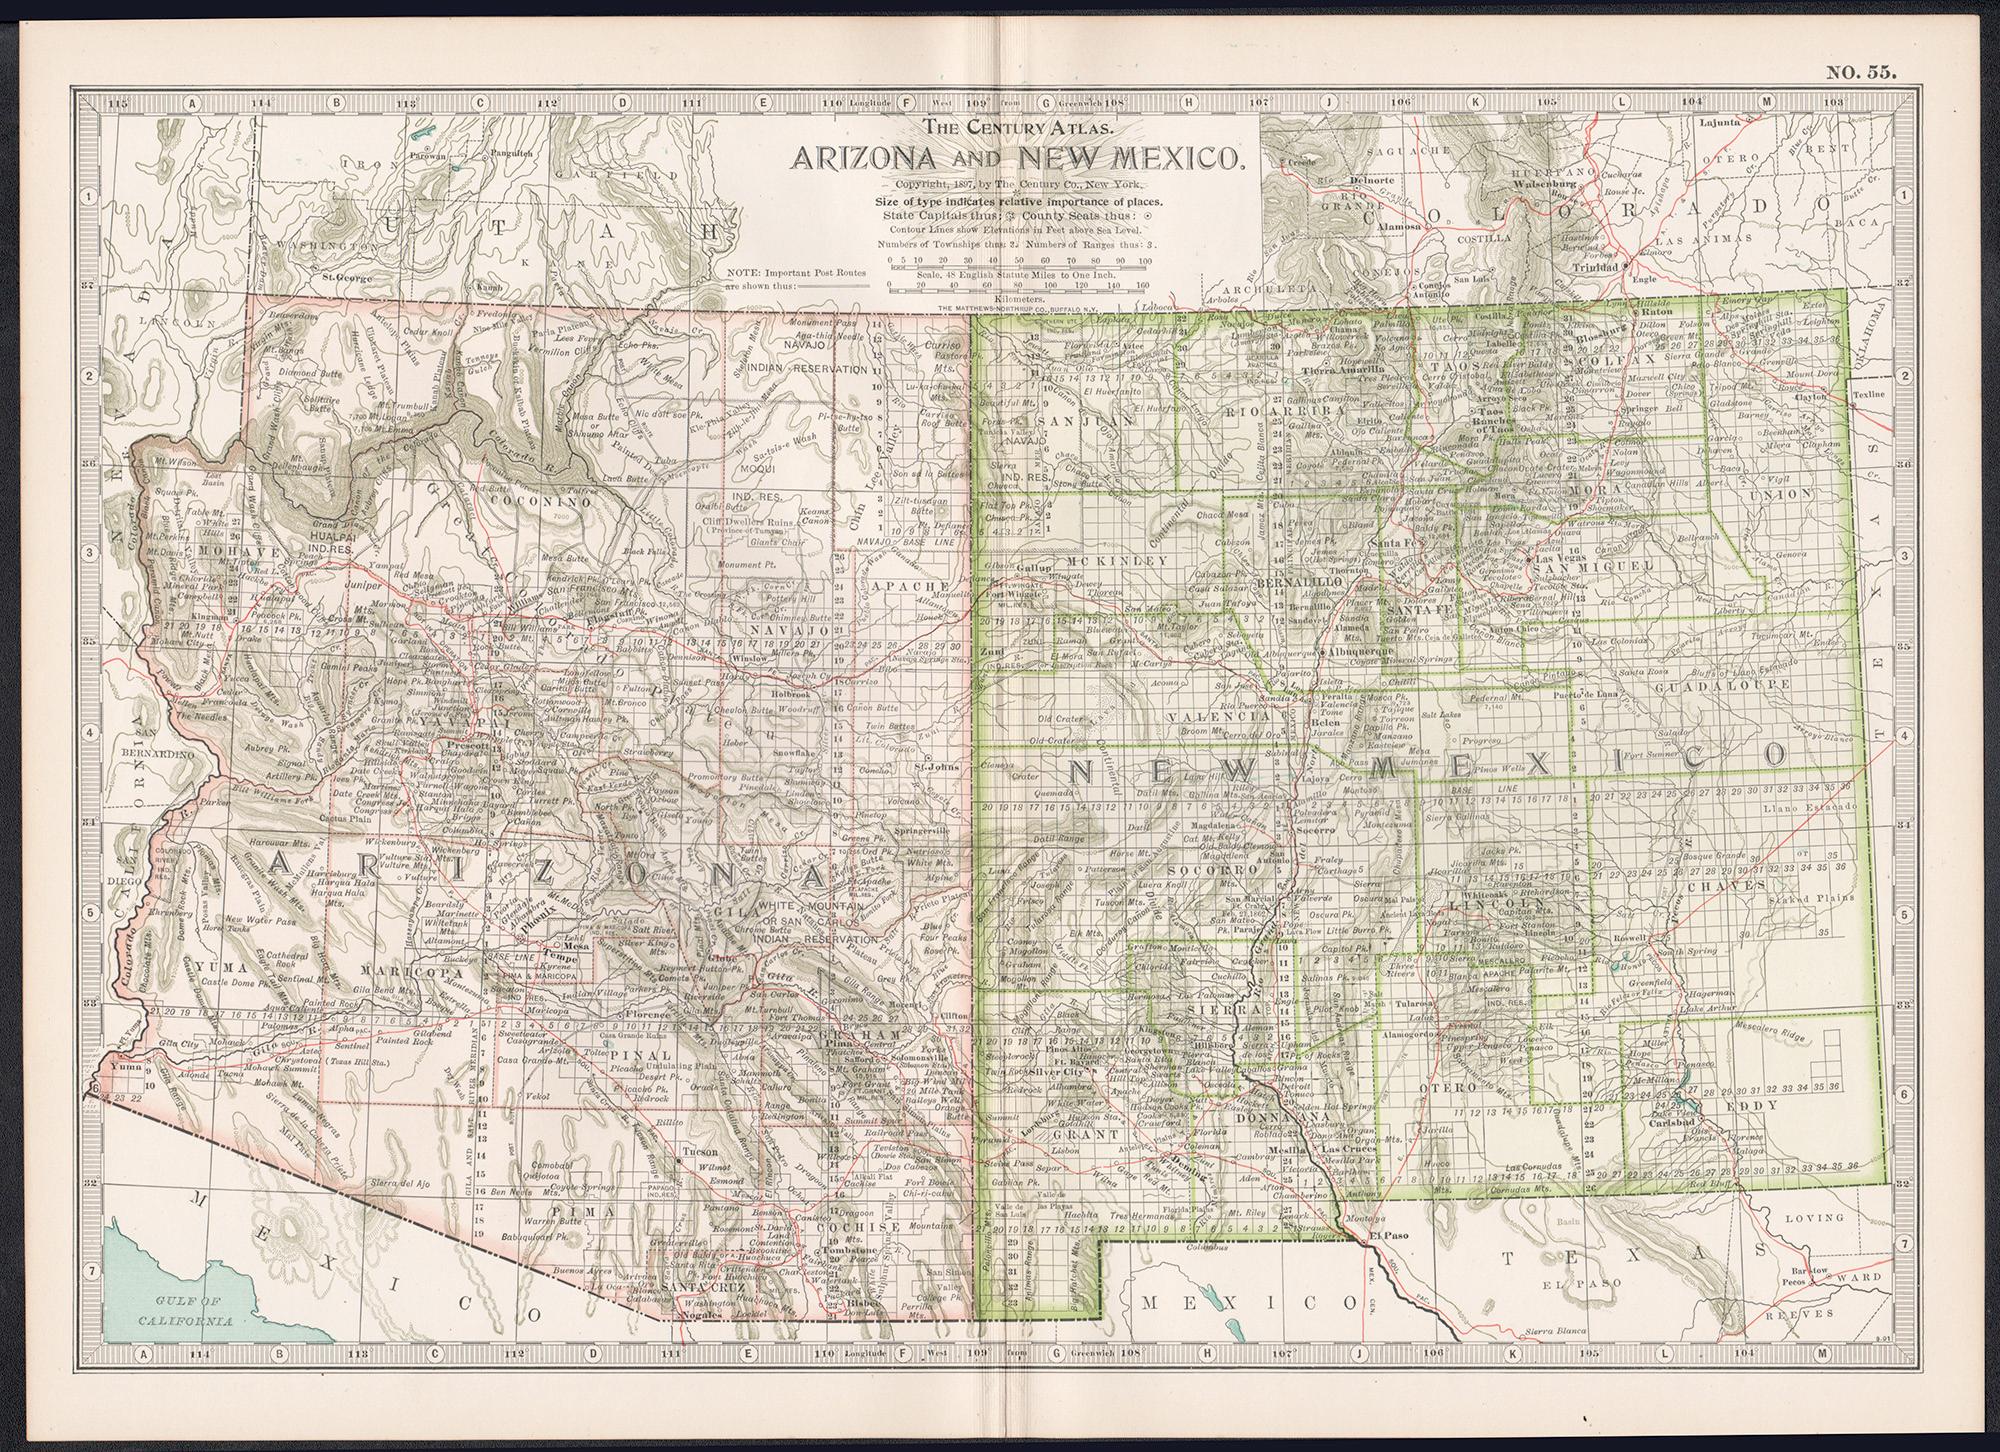 Arizona and New Mexico. USA. Century Atlas state antique vintage map - Print by Unknown